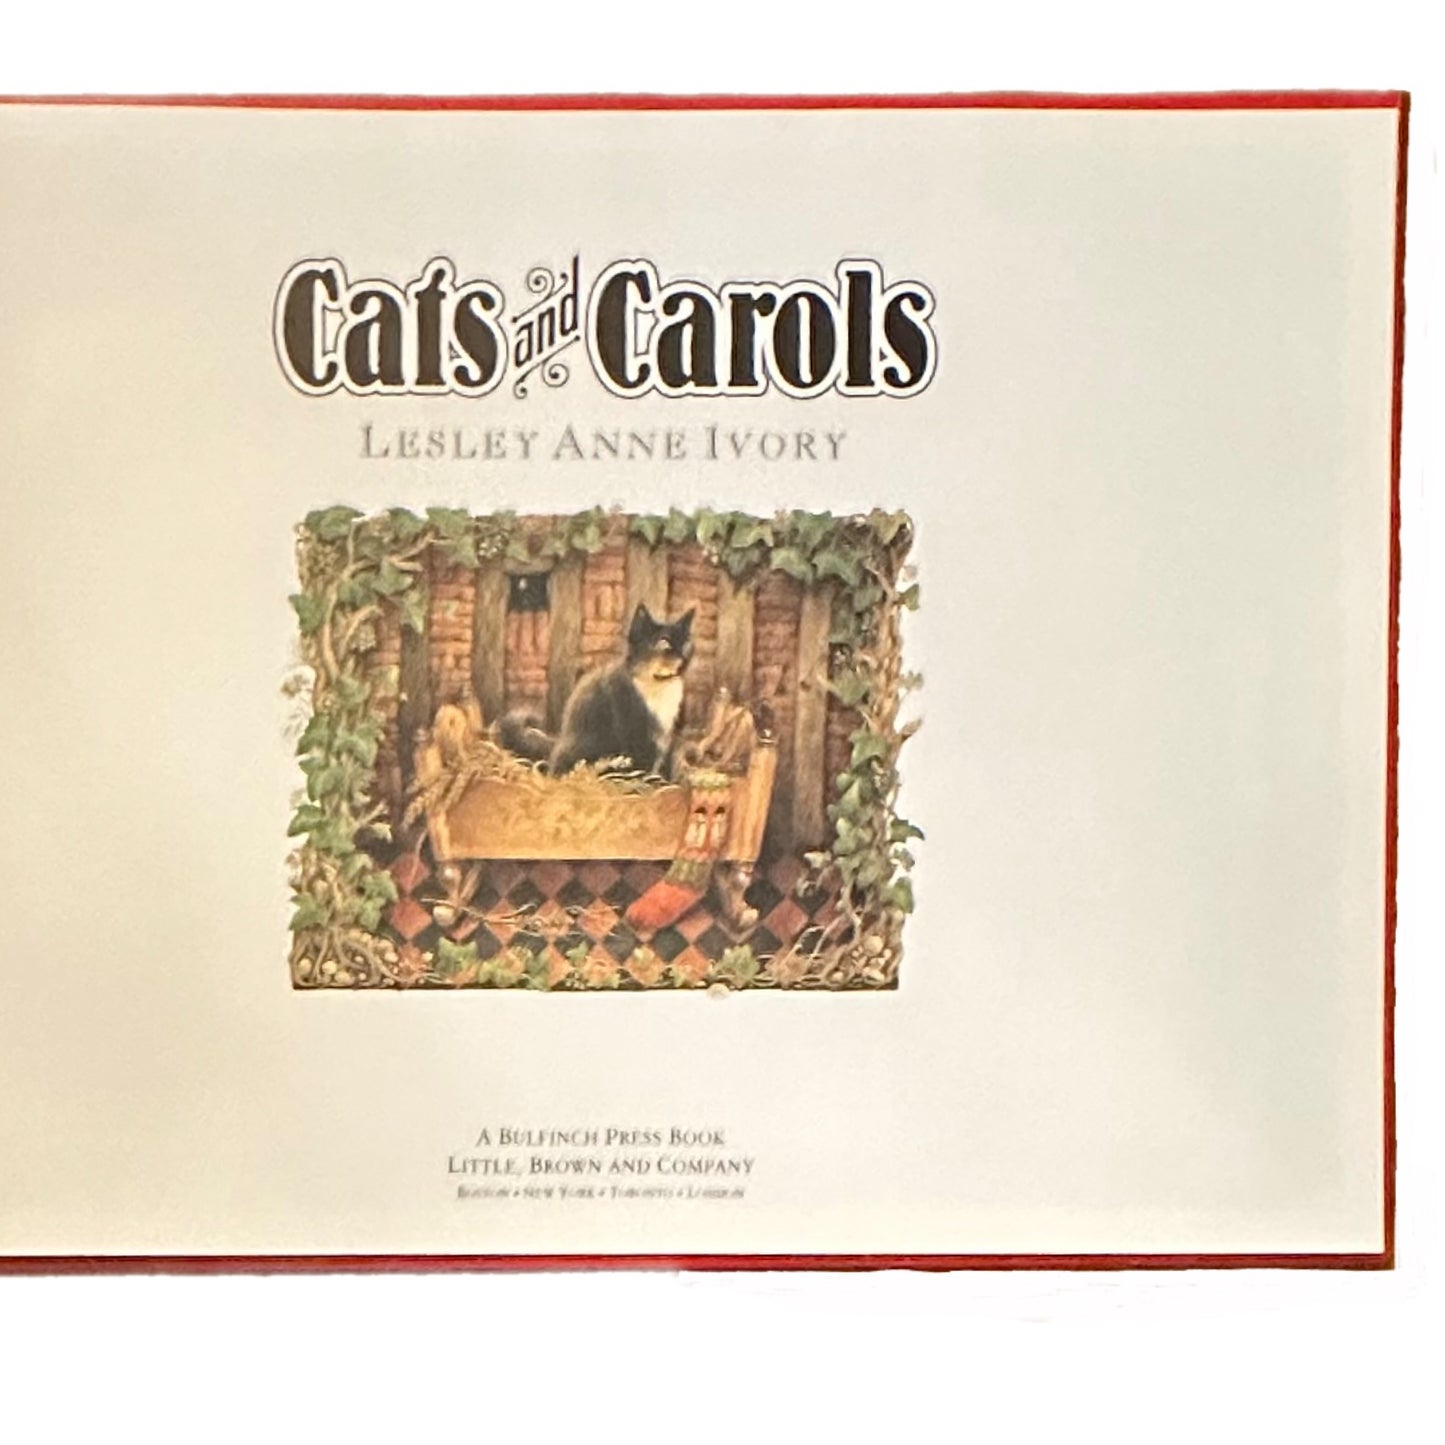 CATS AND CAROLS (1995) by Lesley Anne Ivory